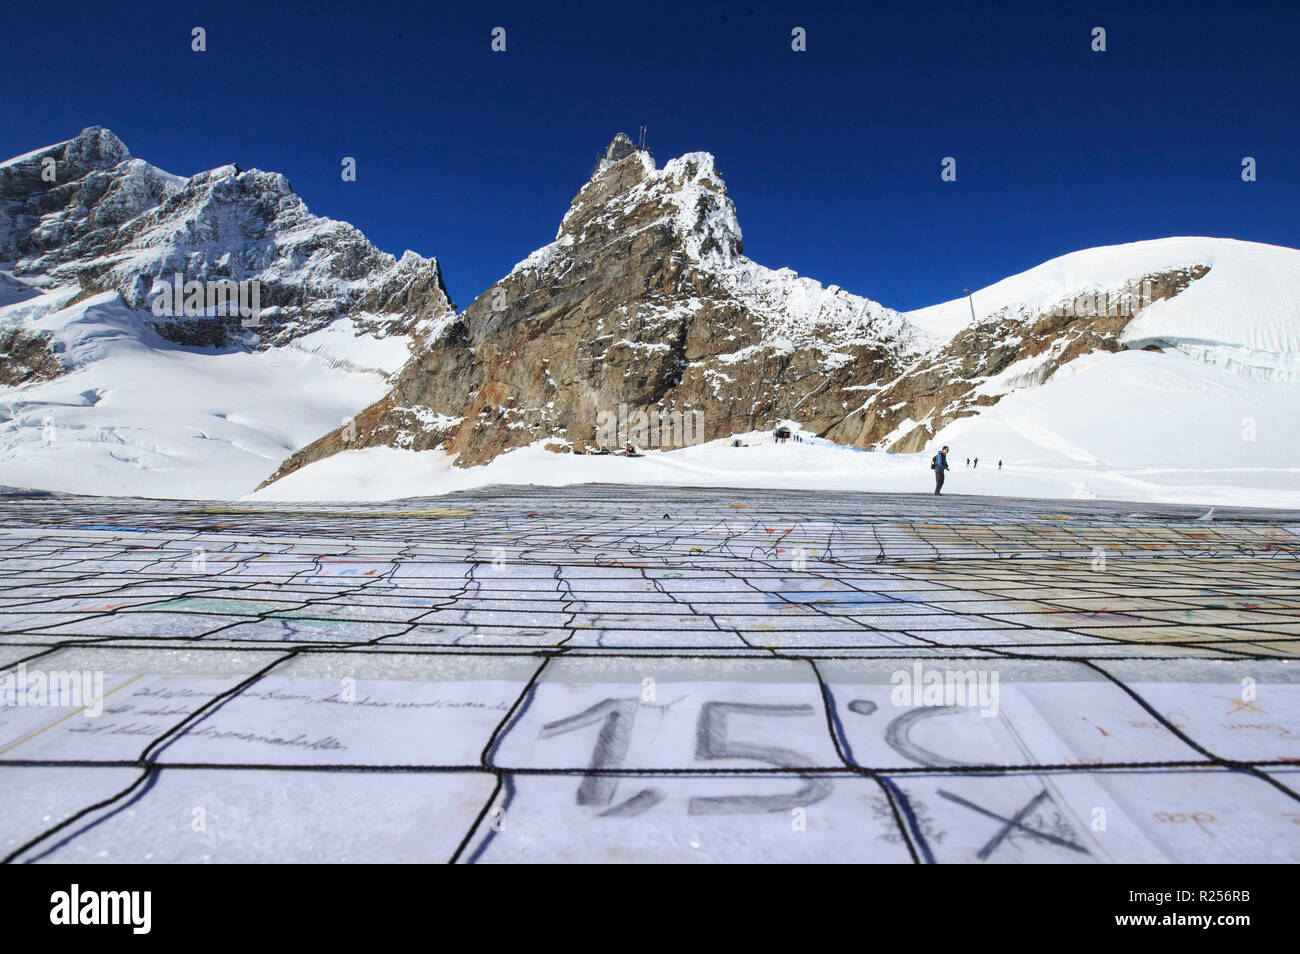 (181116) -- JUNGFRAUJOCH (SWITZERLAND), Nov. 16, 2018 (Xinhua) -- A gigantic postcard with the writing of 1.5 degrees Celsius is seen on the Aletsch glacier under Jungfraujoch in Switzerland, on Nov. 16, 2018. The gigantic postcard breaking the Guinness World Records was staged just under the Swiss Jungfraujoch on Friday to raise awareness worldwide of the emergency and necessity to fight climate change. At the center of the postcard was a huge slogan reading 'STOP GLOBAL WARMING #1.5 ¡ãC' to signify the goal of limiting global warming to a maximum of 1.5 degrees Celsius, a target recently set Stock Photo